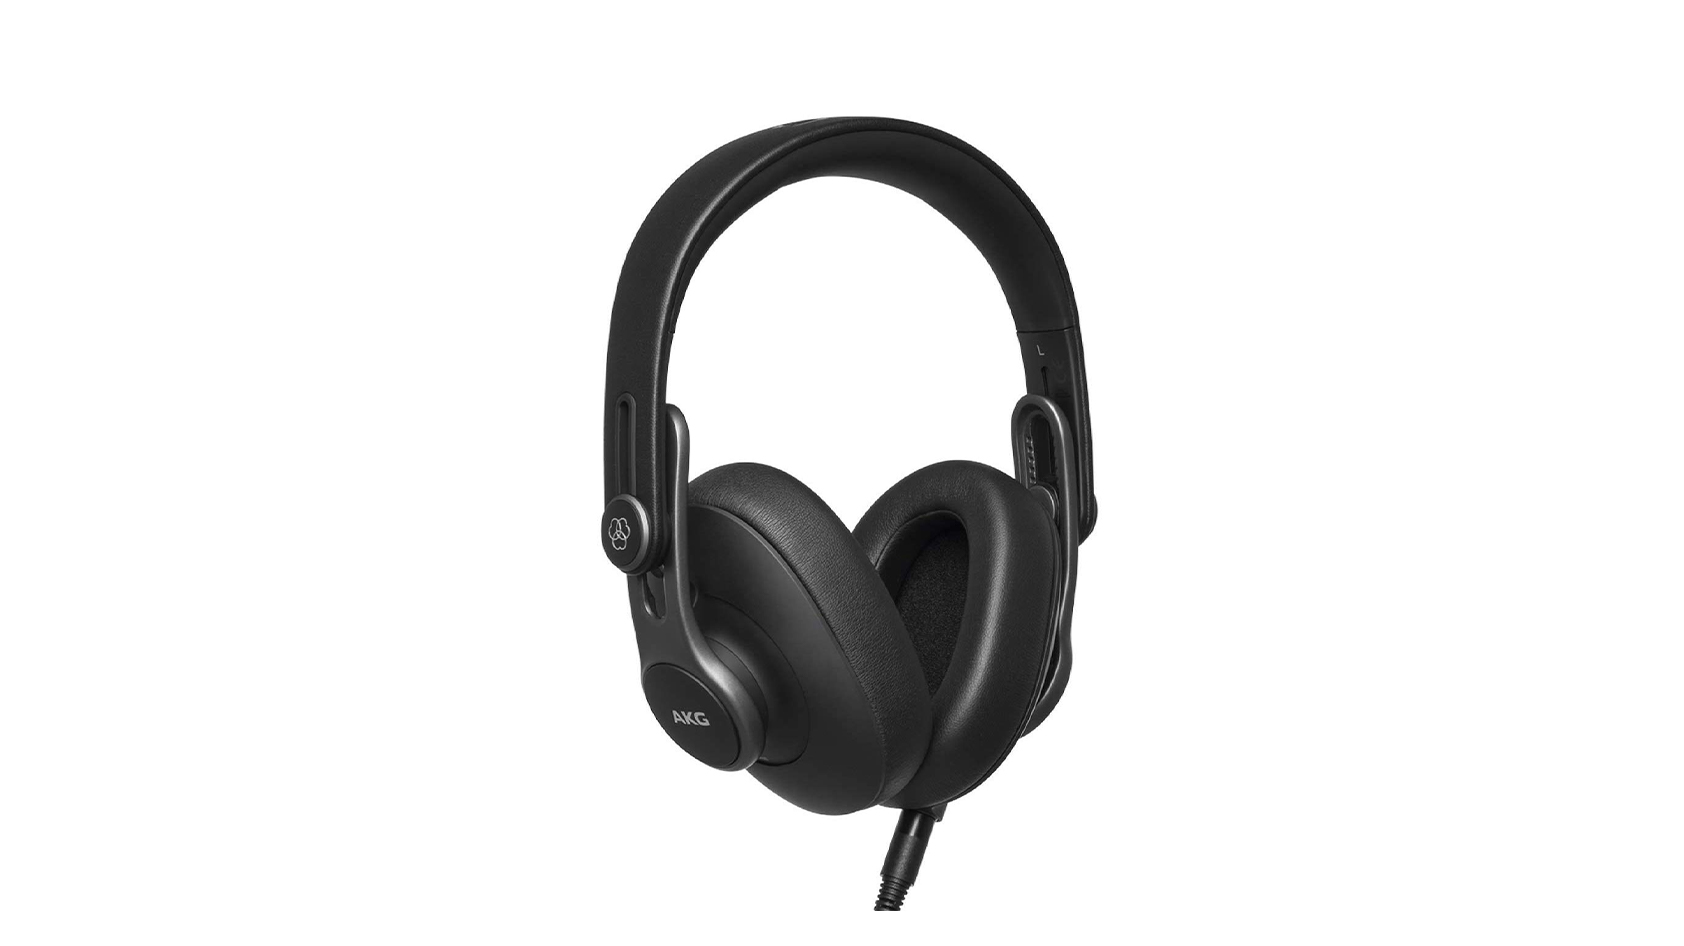 A product image of the AKG K371 headphones in black on a white background.